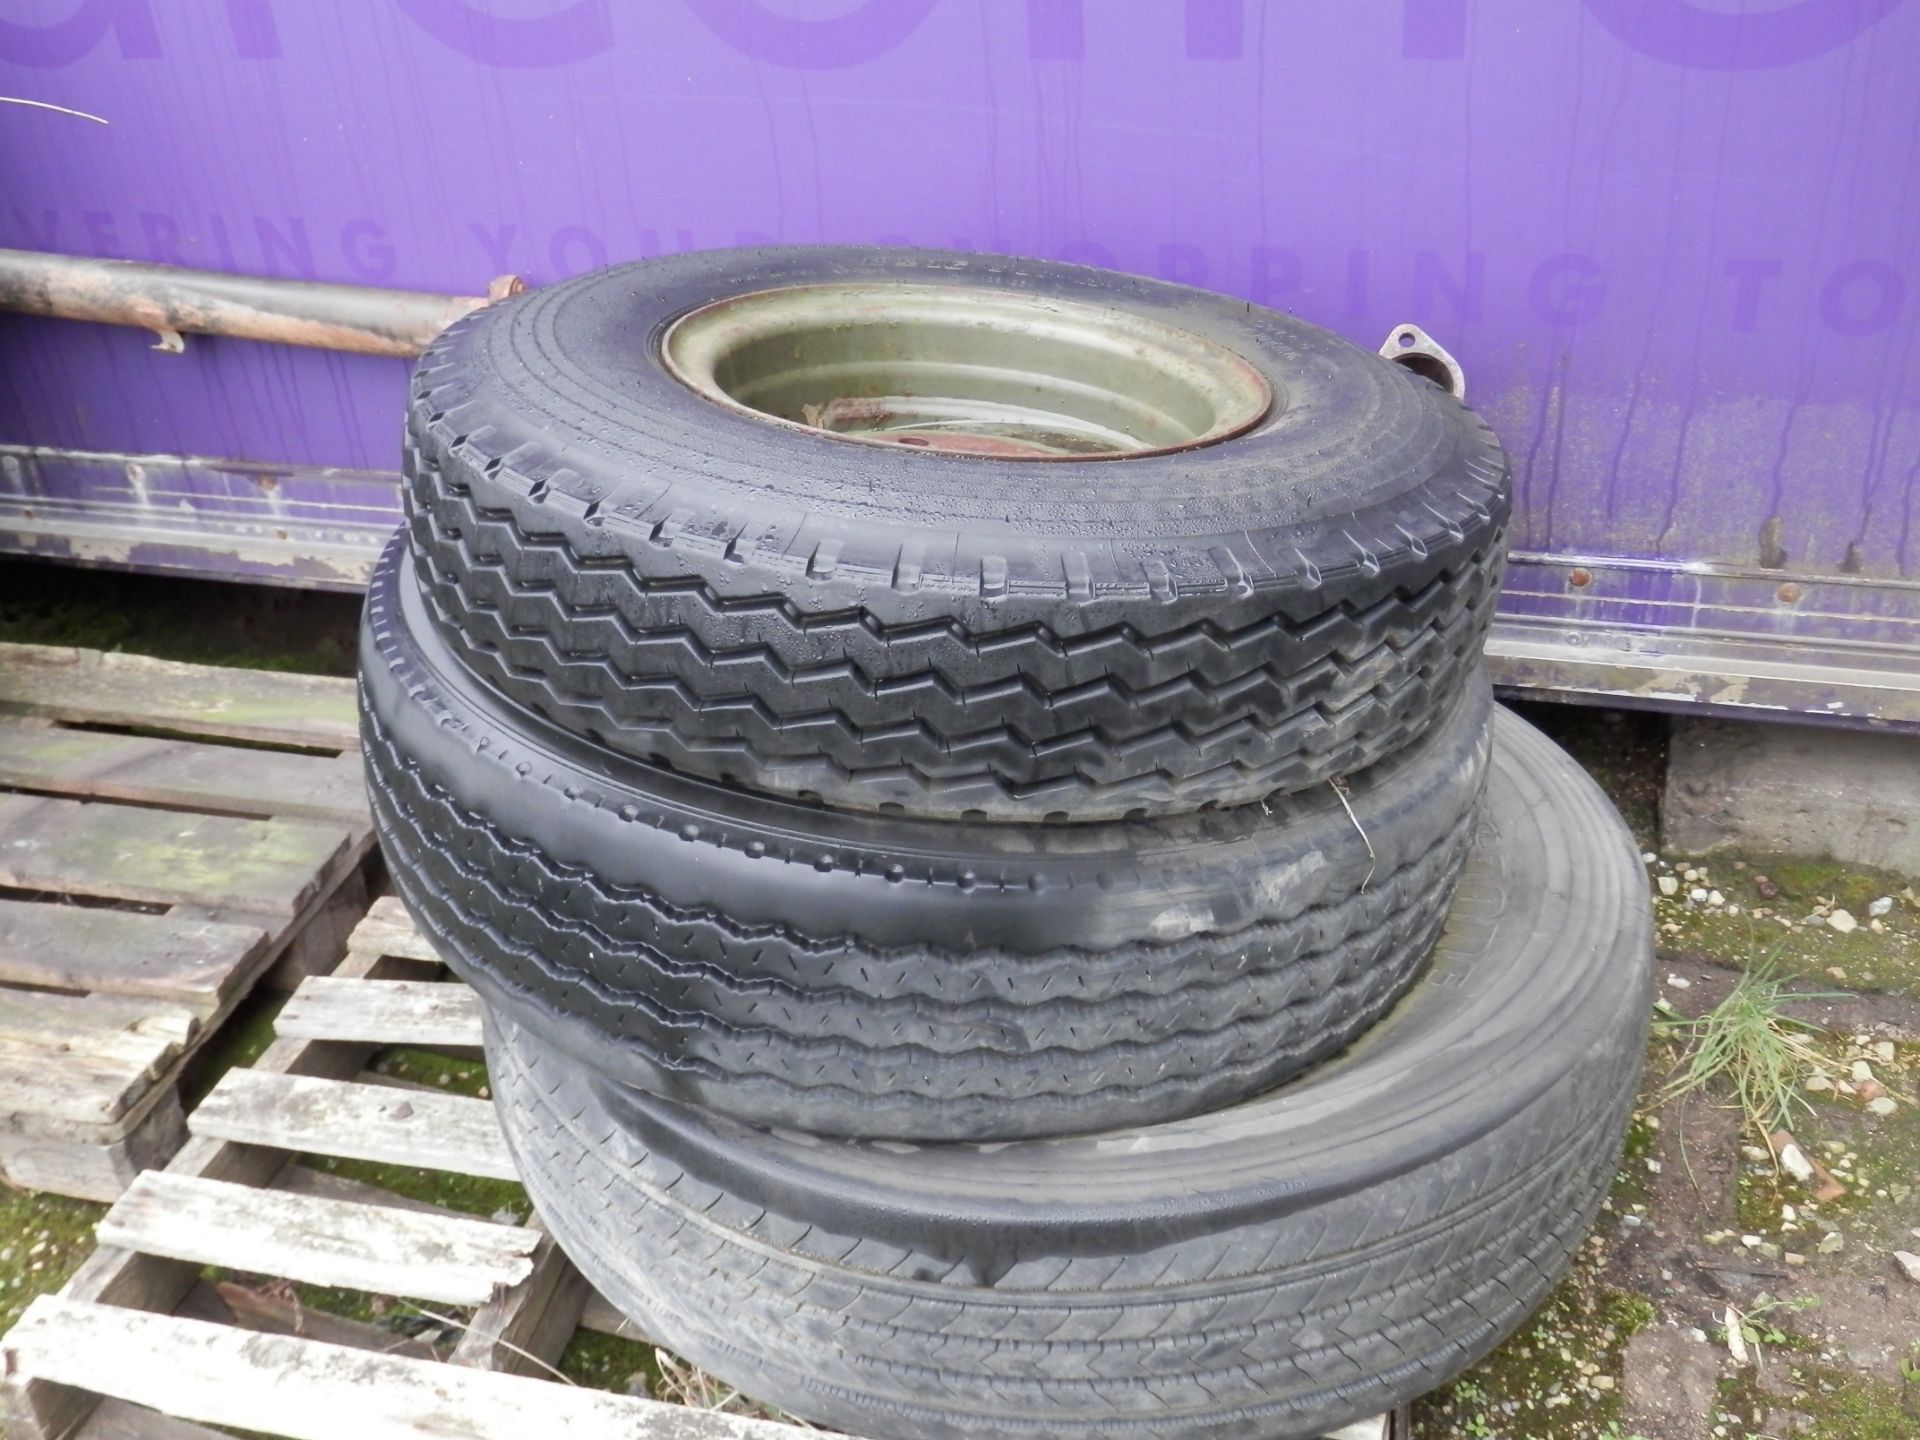 85 + ASSORTED LORRY, CAR & TRAILER TYRES & WHEELS, AS PICTURED. BUYER TO COLLECT COMPLETE JOBLOT. - Image 9 of 10